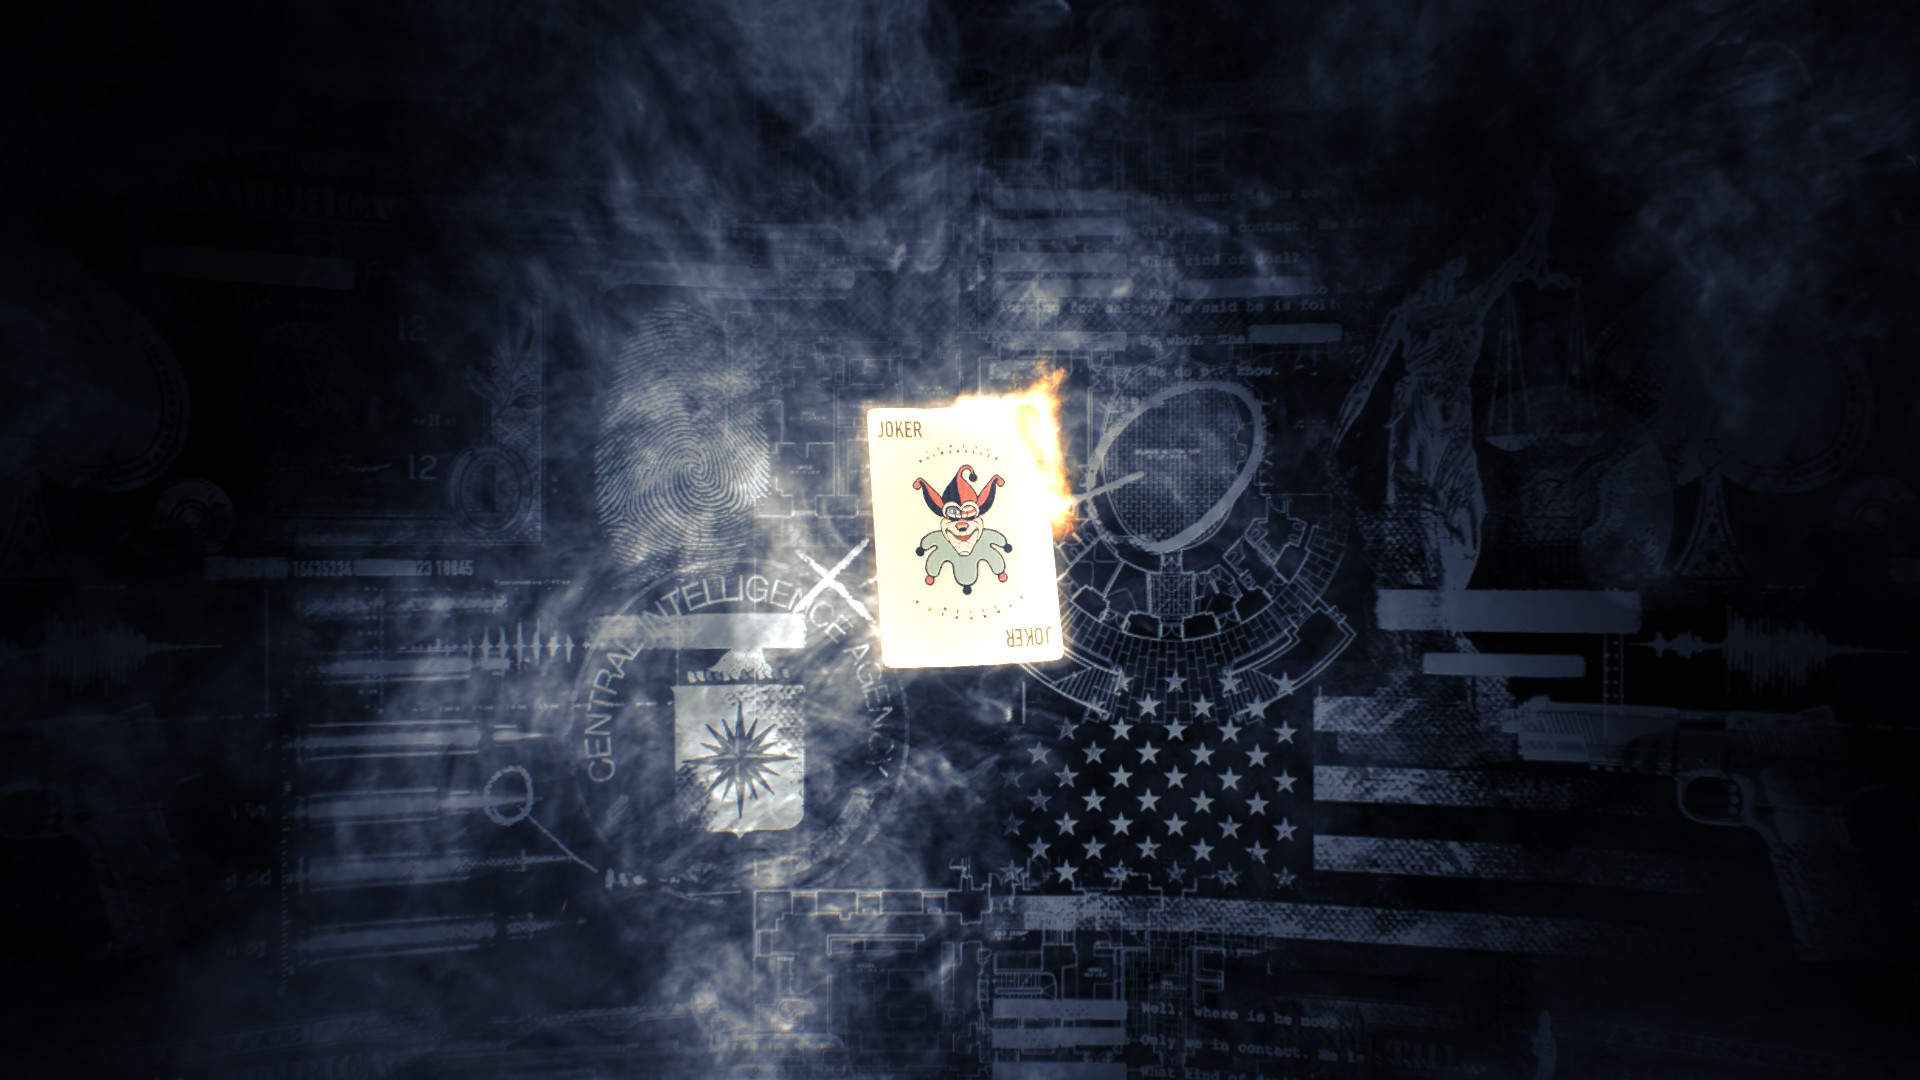 free download infamous payday 2